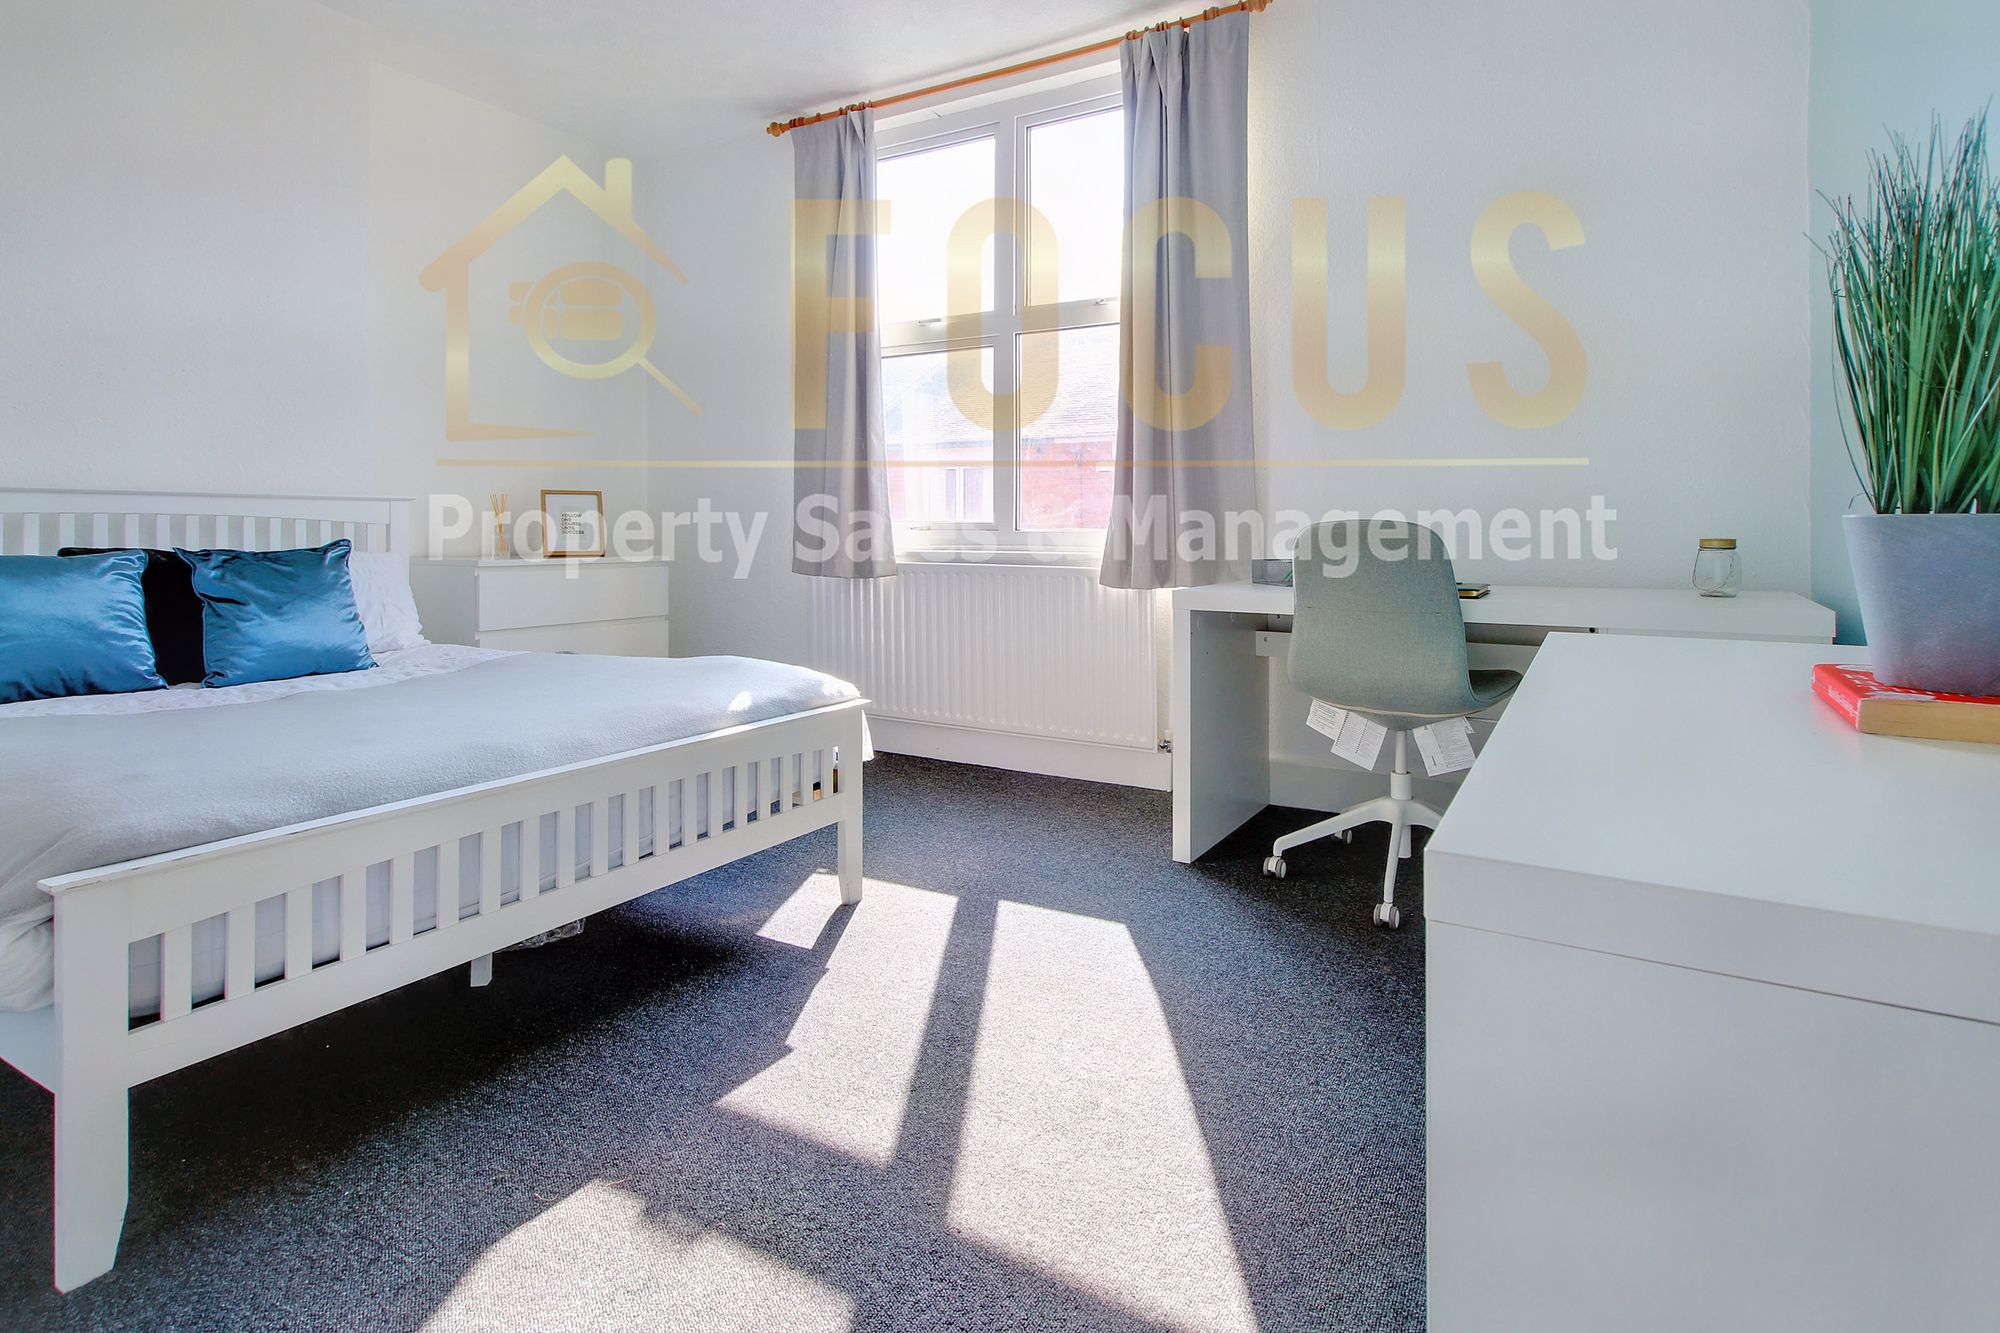 4 bed mid-terraced house to rent in Lytham Road, Leicester  - Property Image 1